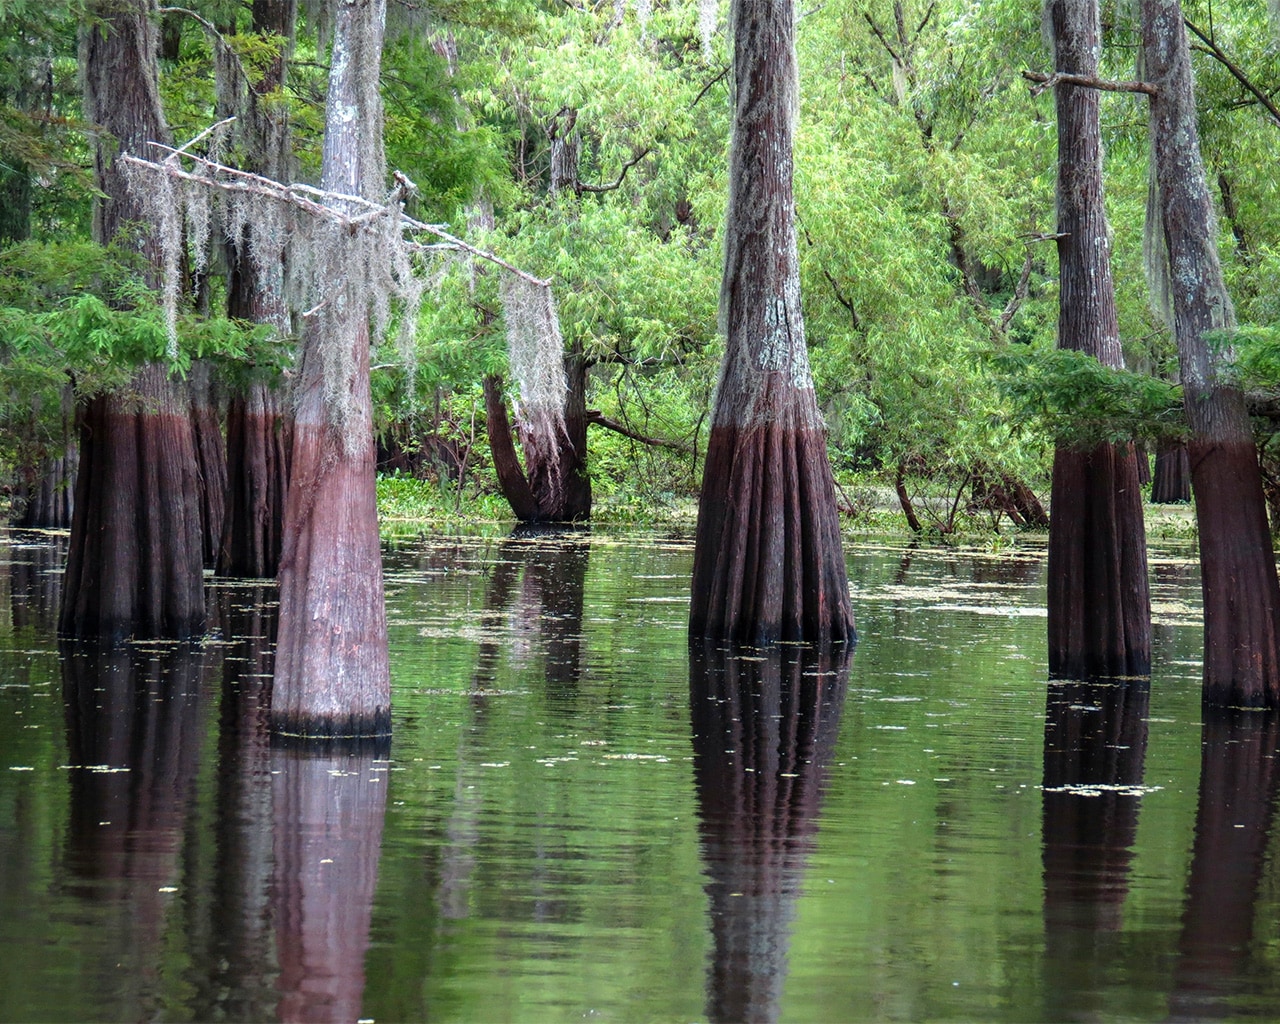 Cypress trees in the swamp